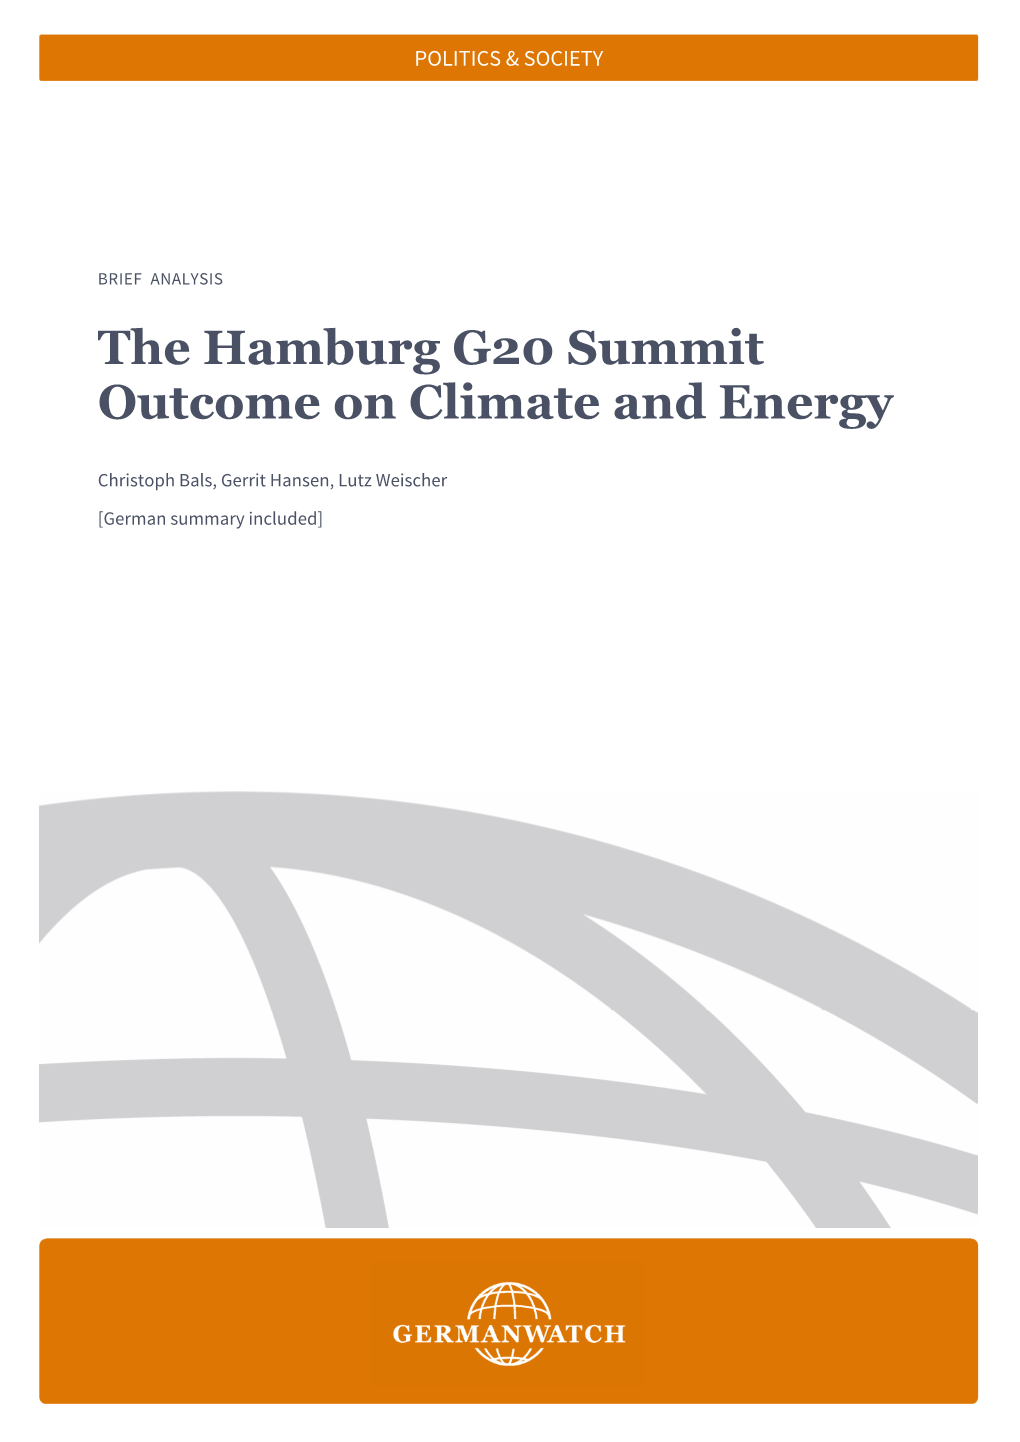 'The Hamburg G20 Summit Outcome on Climate and Energy'.Pdf